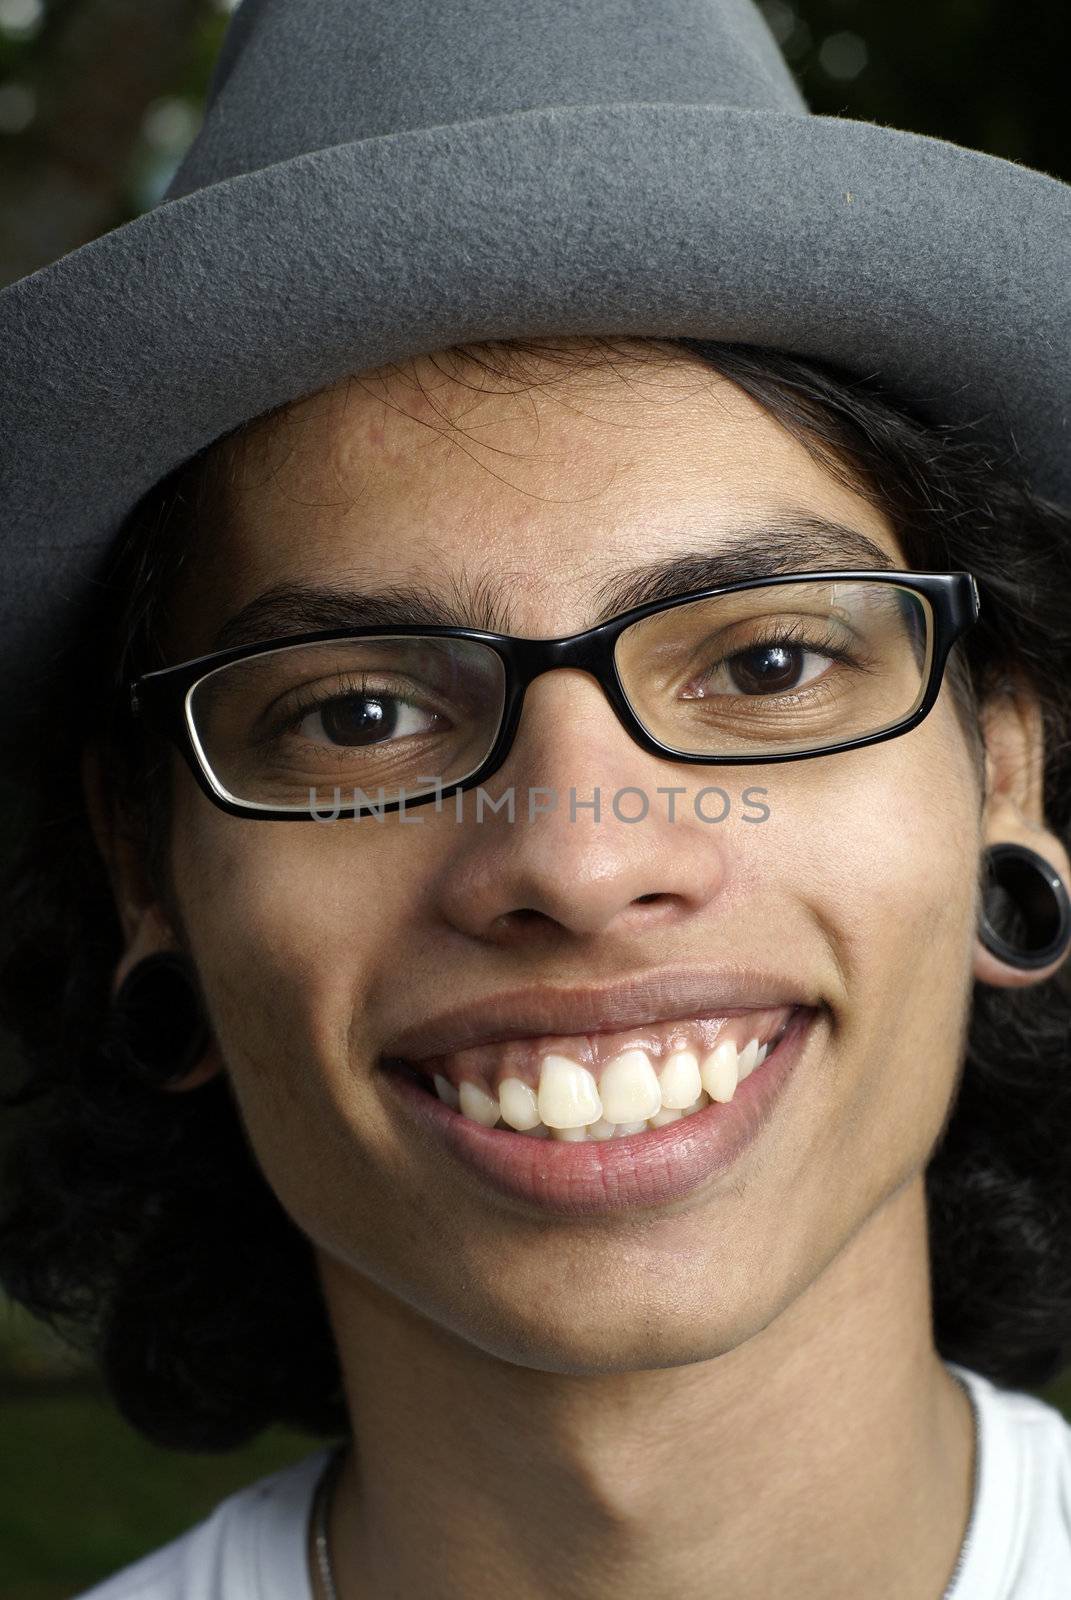 Smiling asian man with hat and pierced ears.